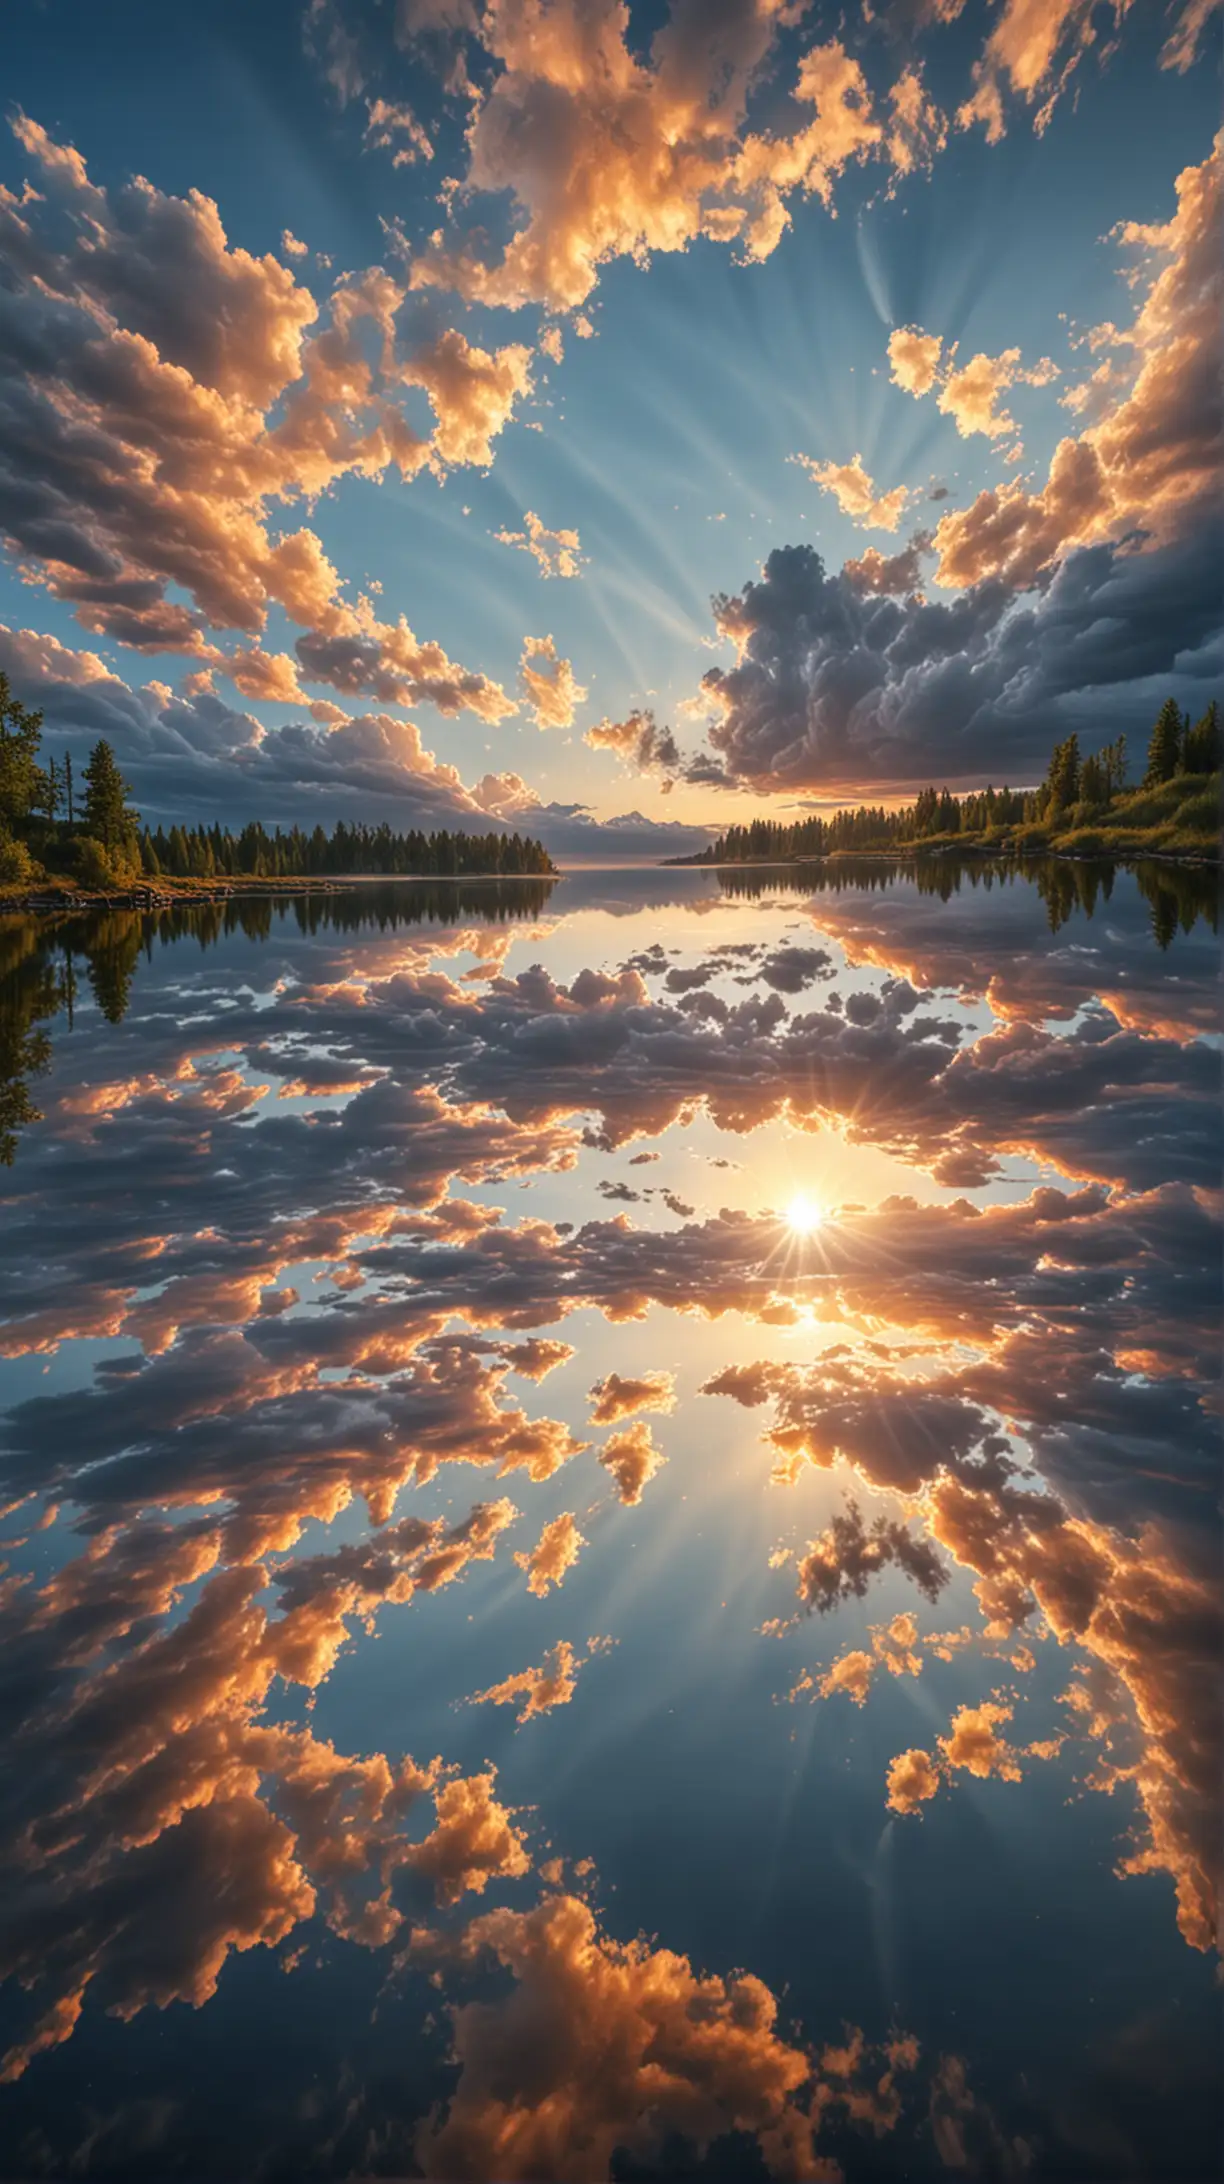 Make gorgeous sky reflect in the amazing lake, 4k quality photo, make photo very clear 